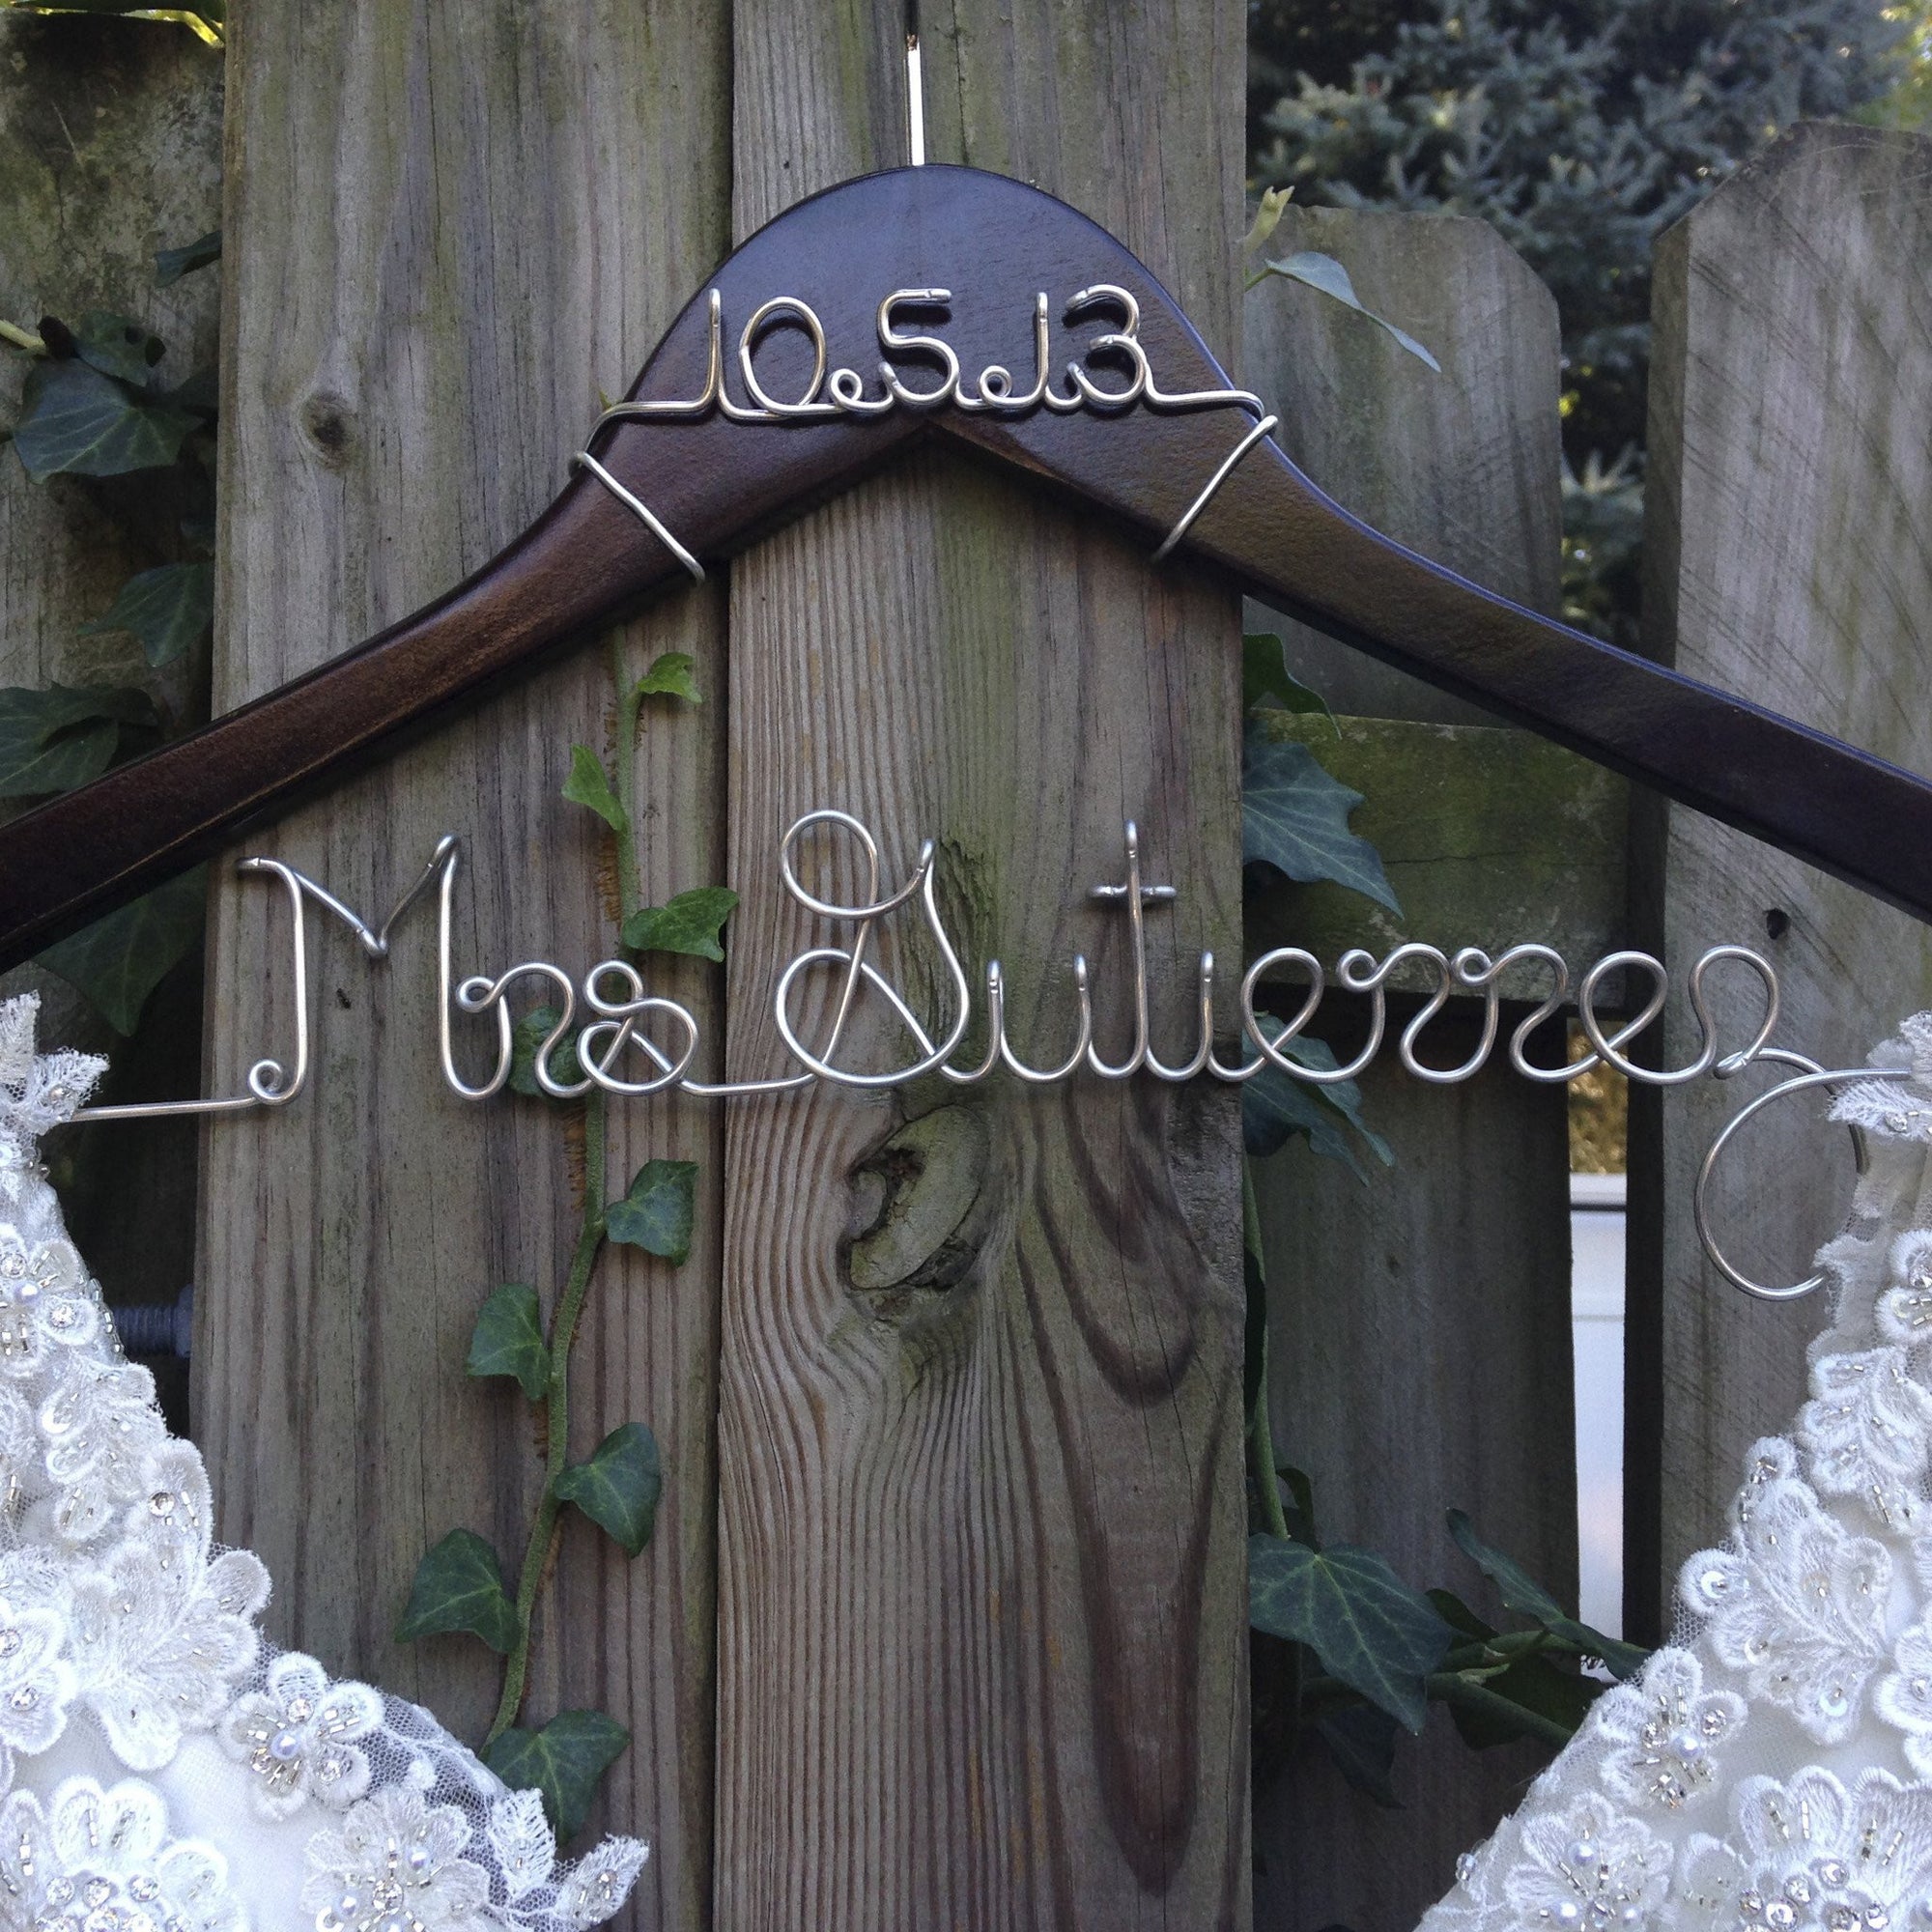 Dark wooden hanger with personalized date and base wire shaped into personalized name